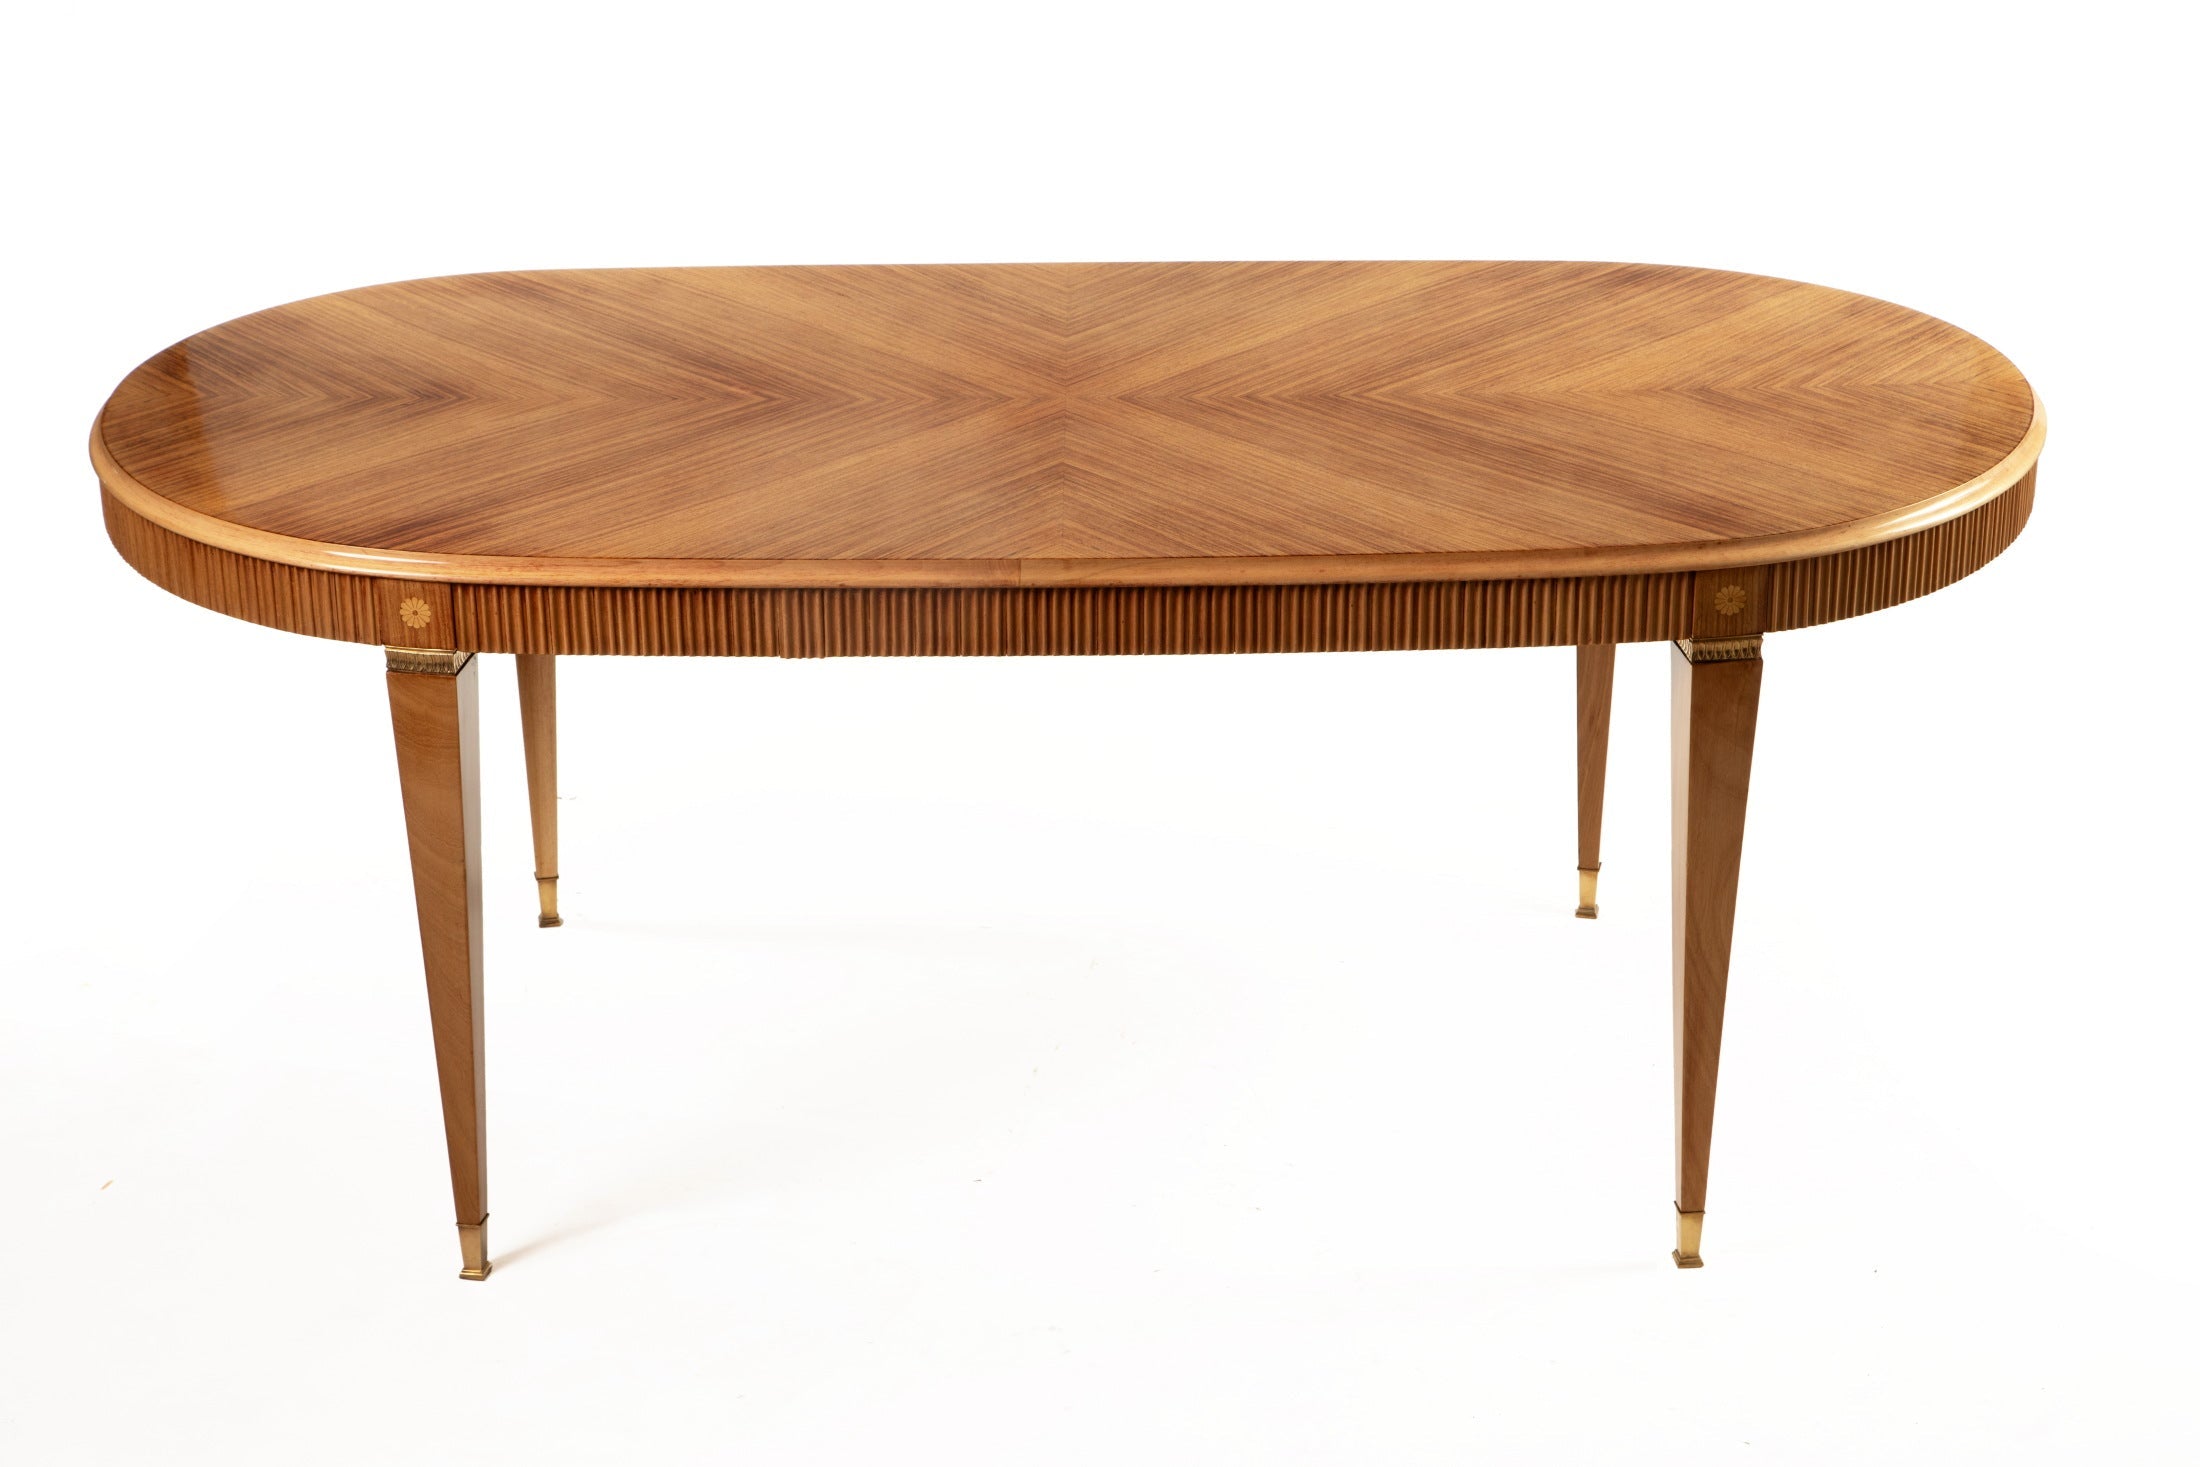 Paolo Buffa blond maple table from the 1950s